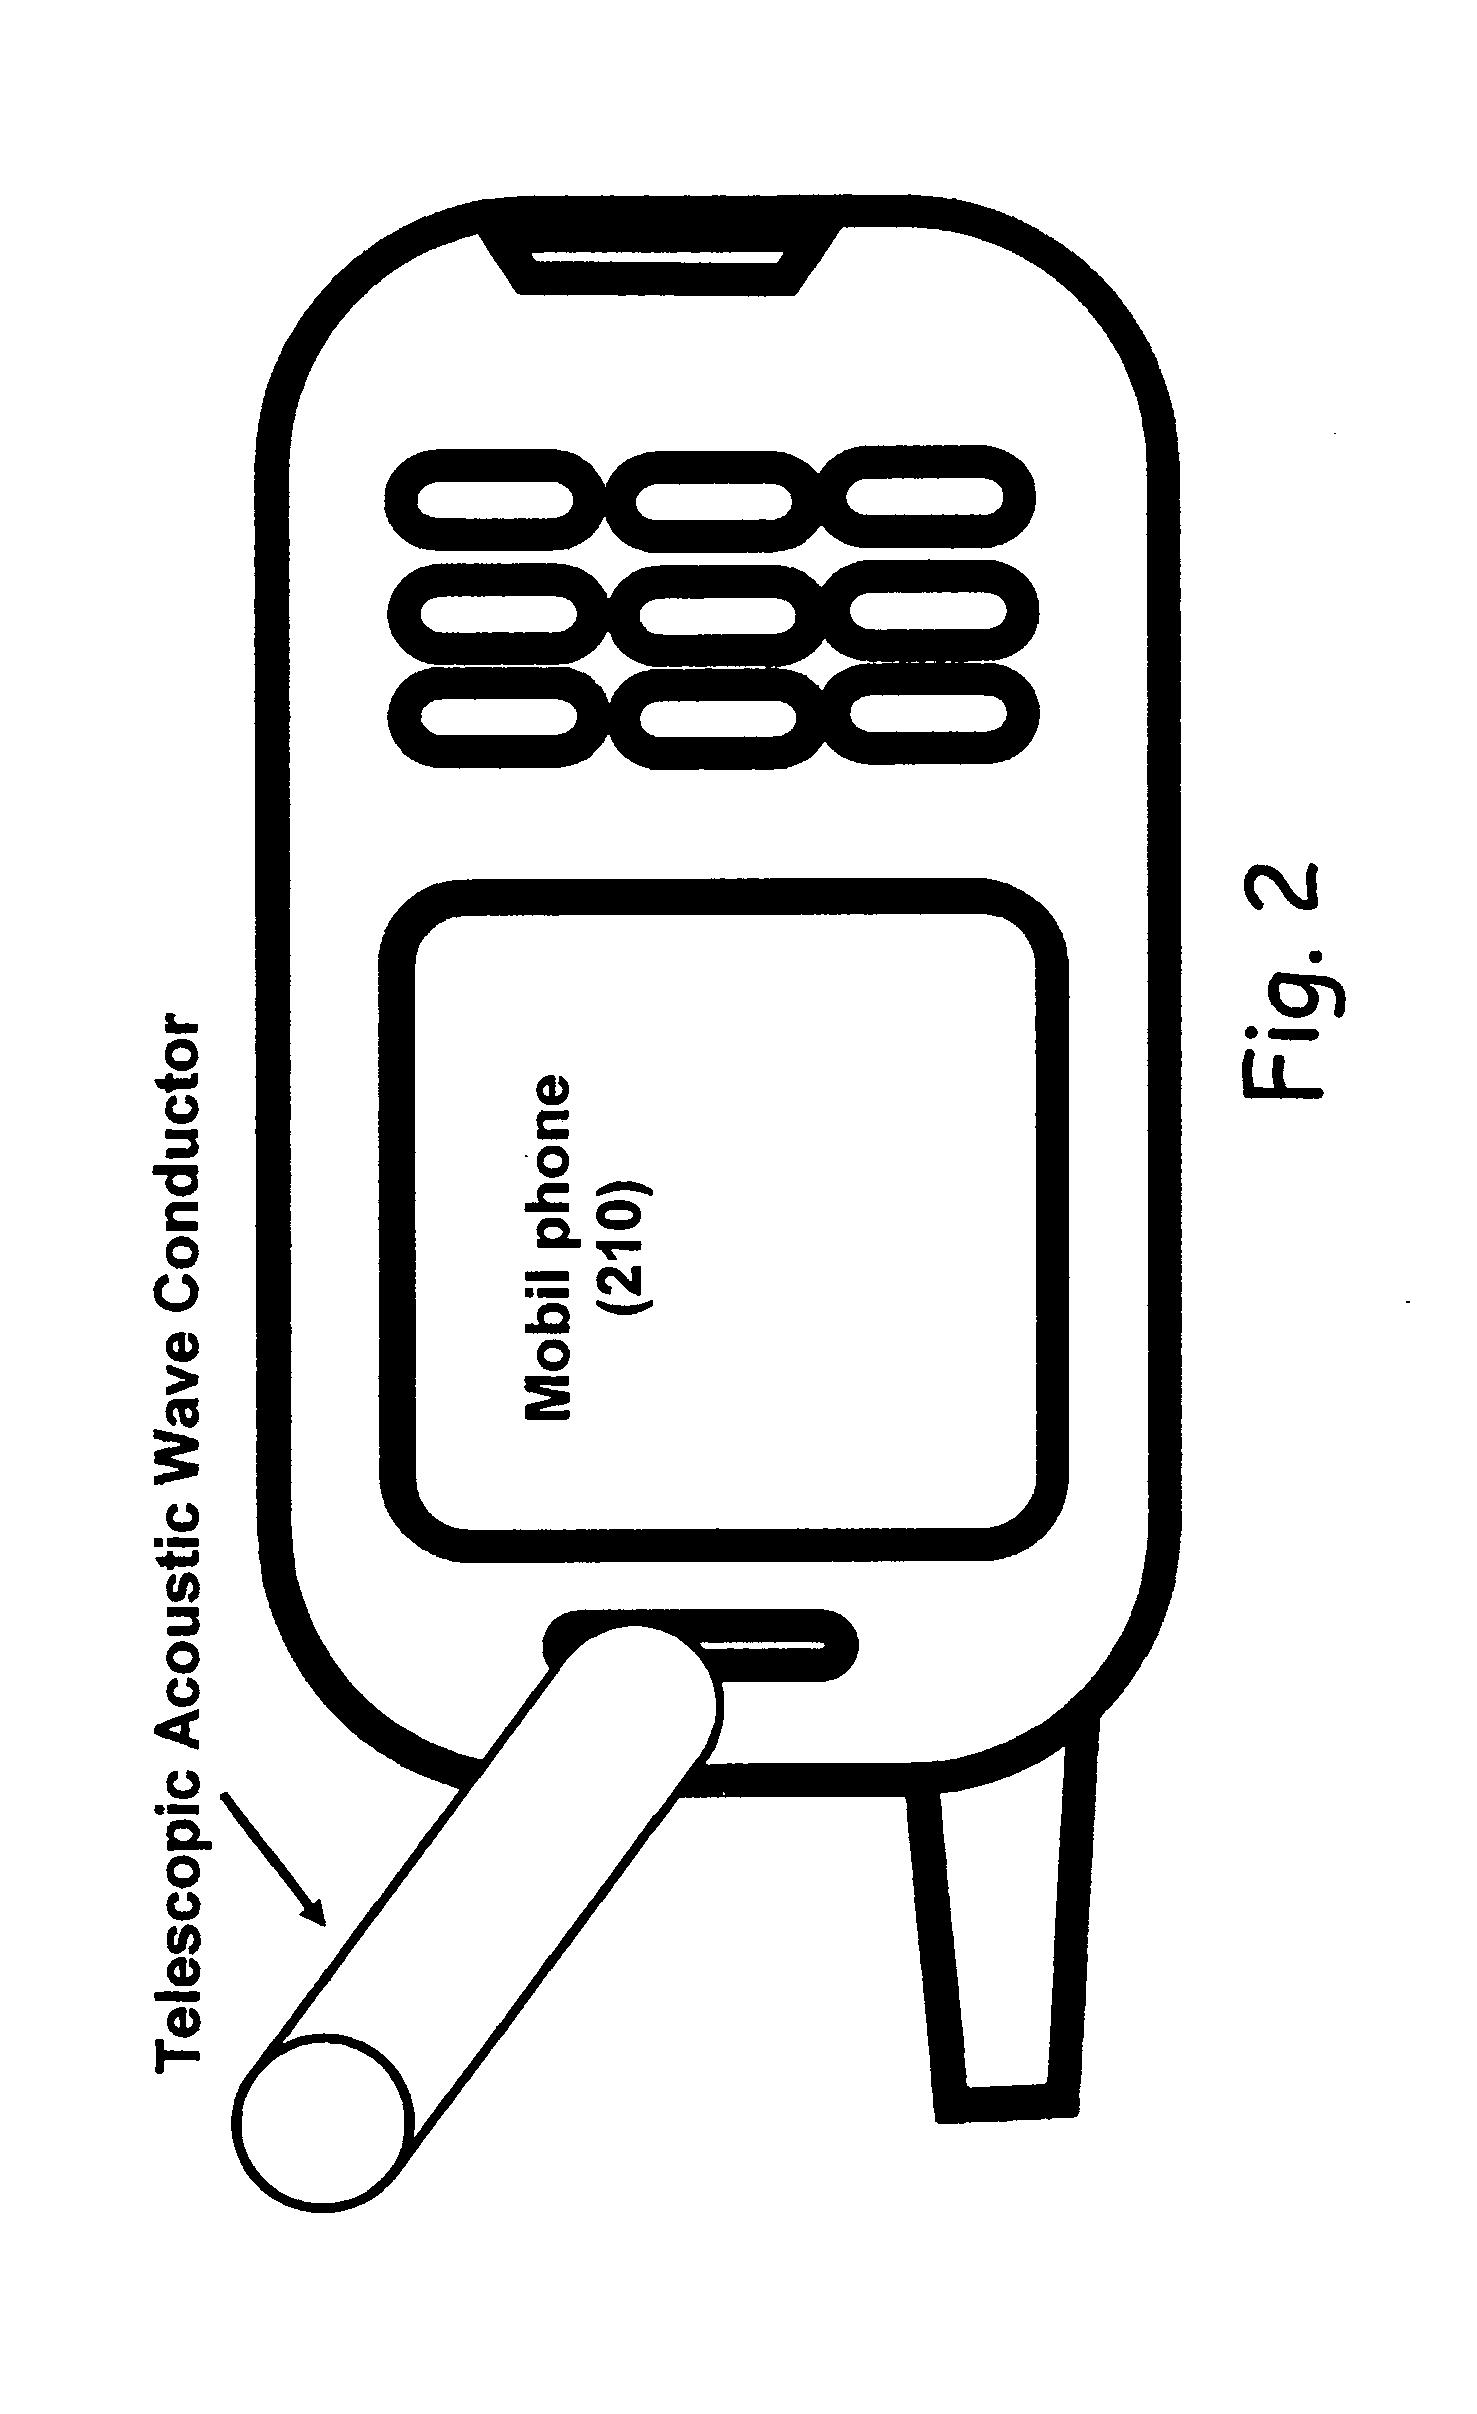 Acoustic wave conductor for mobile devices